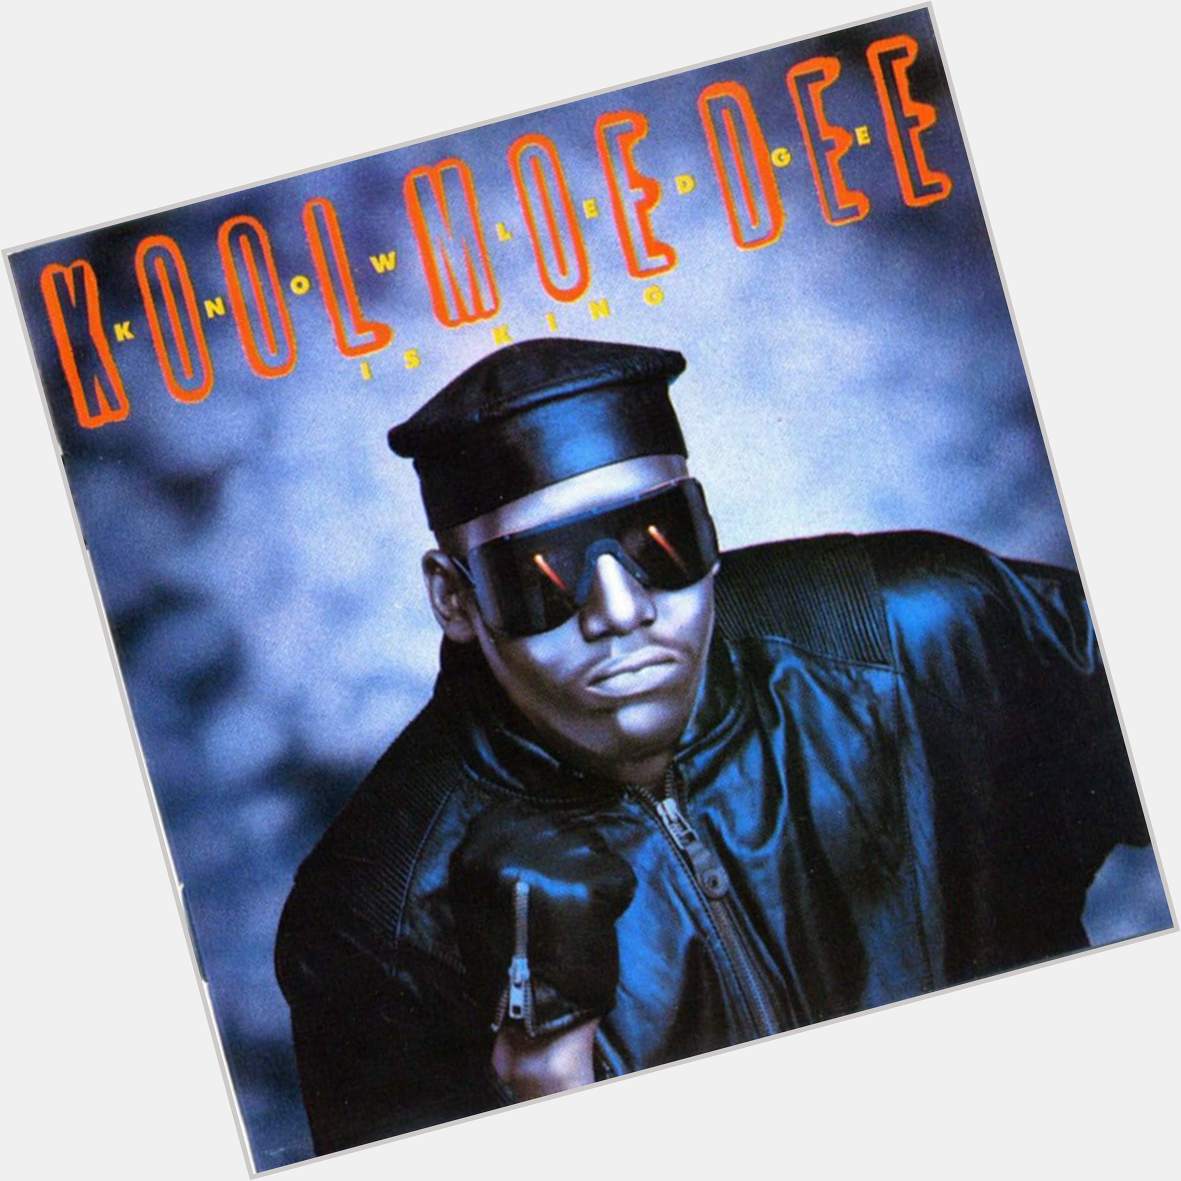 Happy 55th birthday to Kool Moe Dee. This man was already in 2027 back in 1987. 